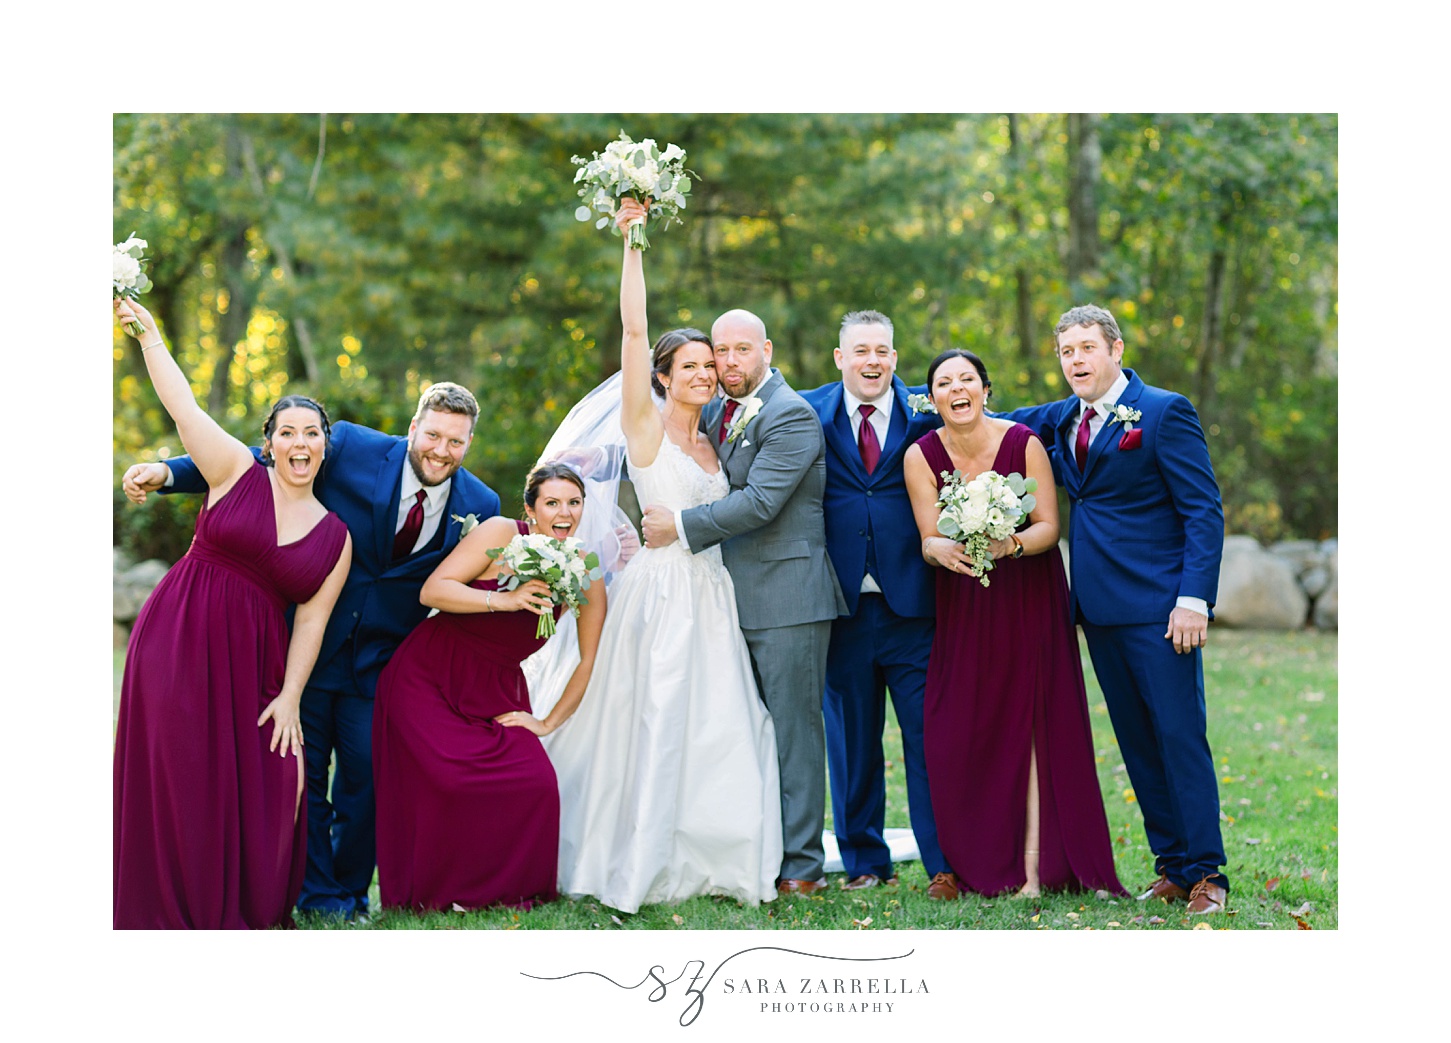 bride and groom pose with bridal party in burgundy gowns and navy suits